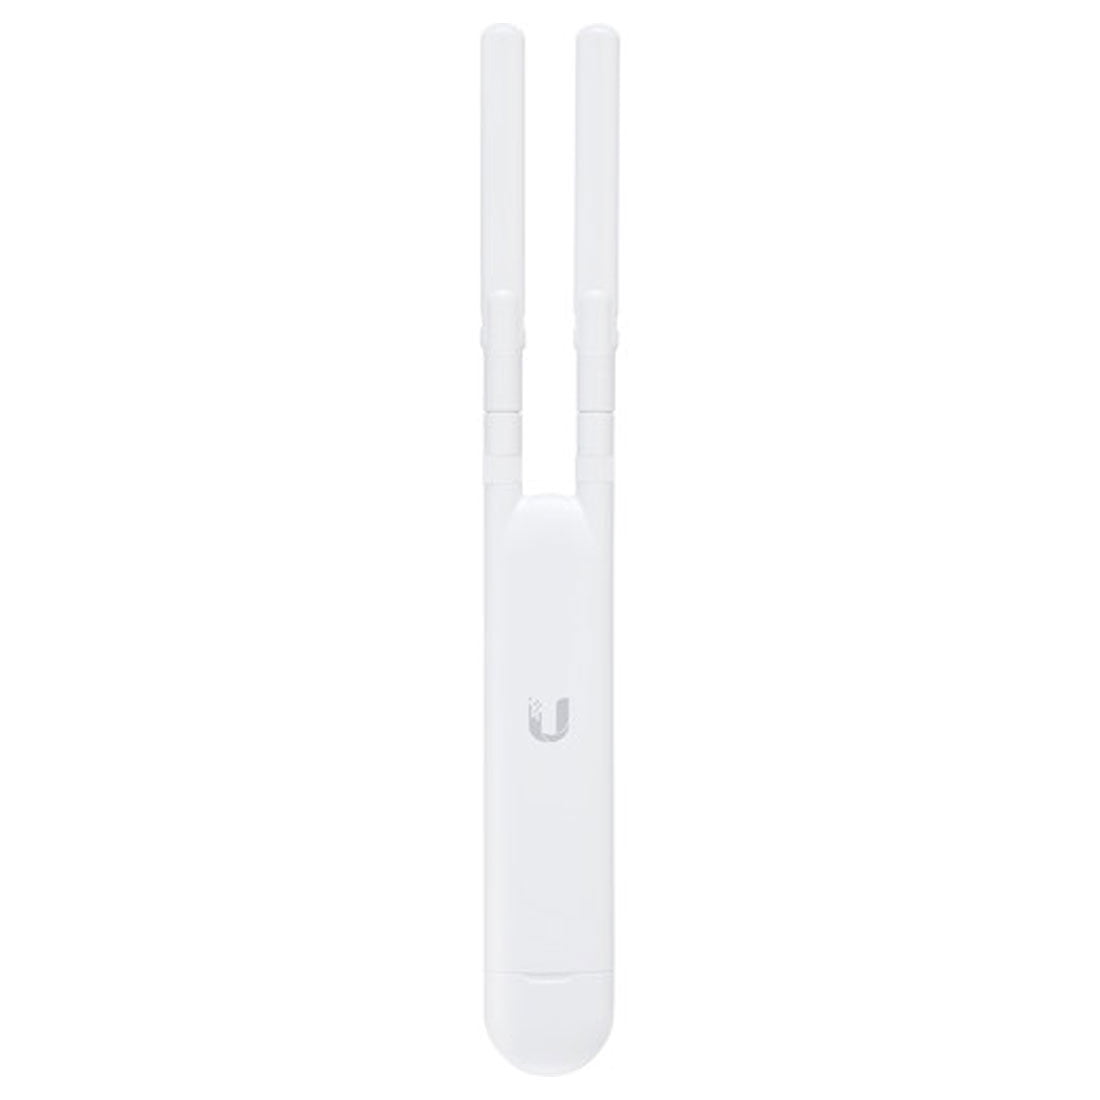 Ubiquiti Networks UAP-AC-M-US Mesh Wide-Area Indoor/Outdoor Dual-Band Access Point